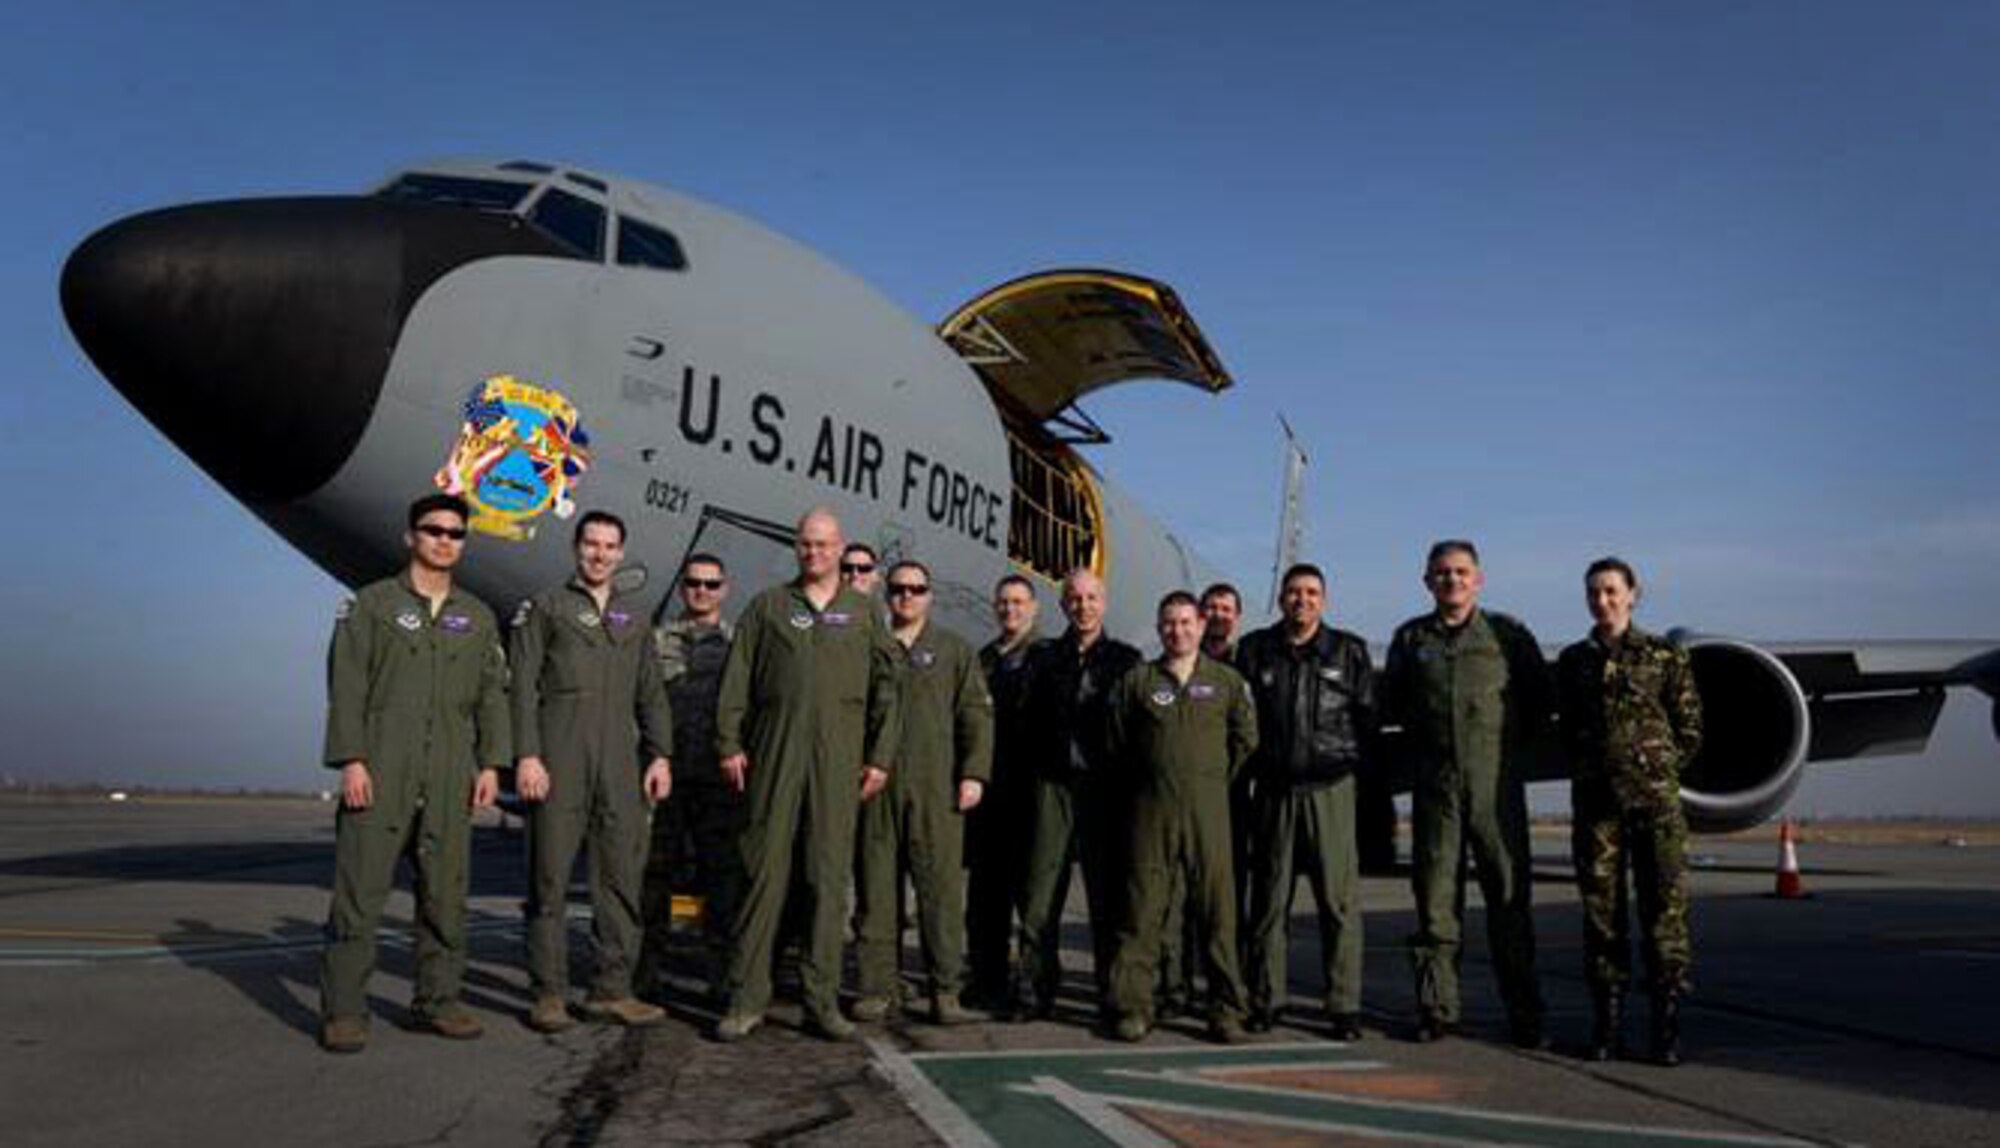 U.S. Air Force and Romanian air force Airmen pose for a photo after a flight Feb. 28, 2017, during air refueling training over Bucharest, Romania. The RoAF F-16 Fighting Falcons made their first contact with a U.S. tanker during the flight as part of air refueling training and certification conducted by the 100th Air Refueling Wing from RAF Mildenhall, England. (U.S. Air Force photo by Staff Sgt. Kate Thornton)